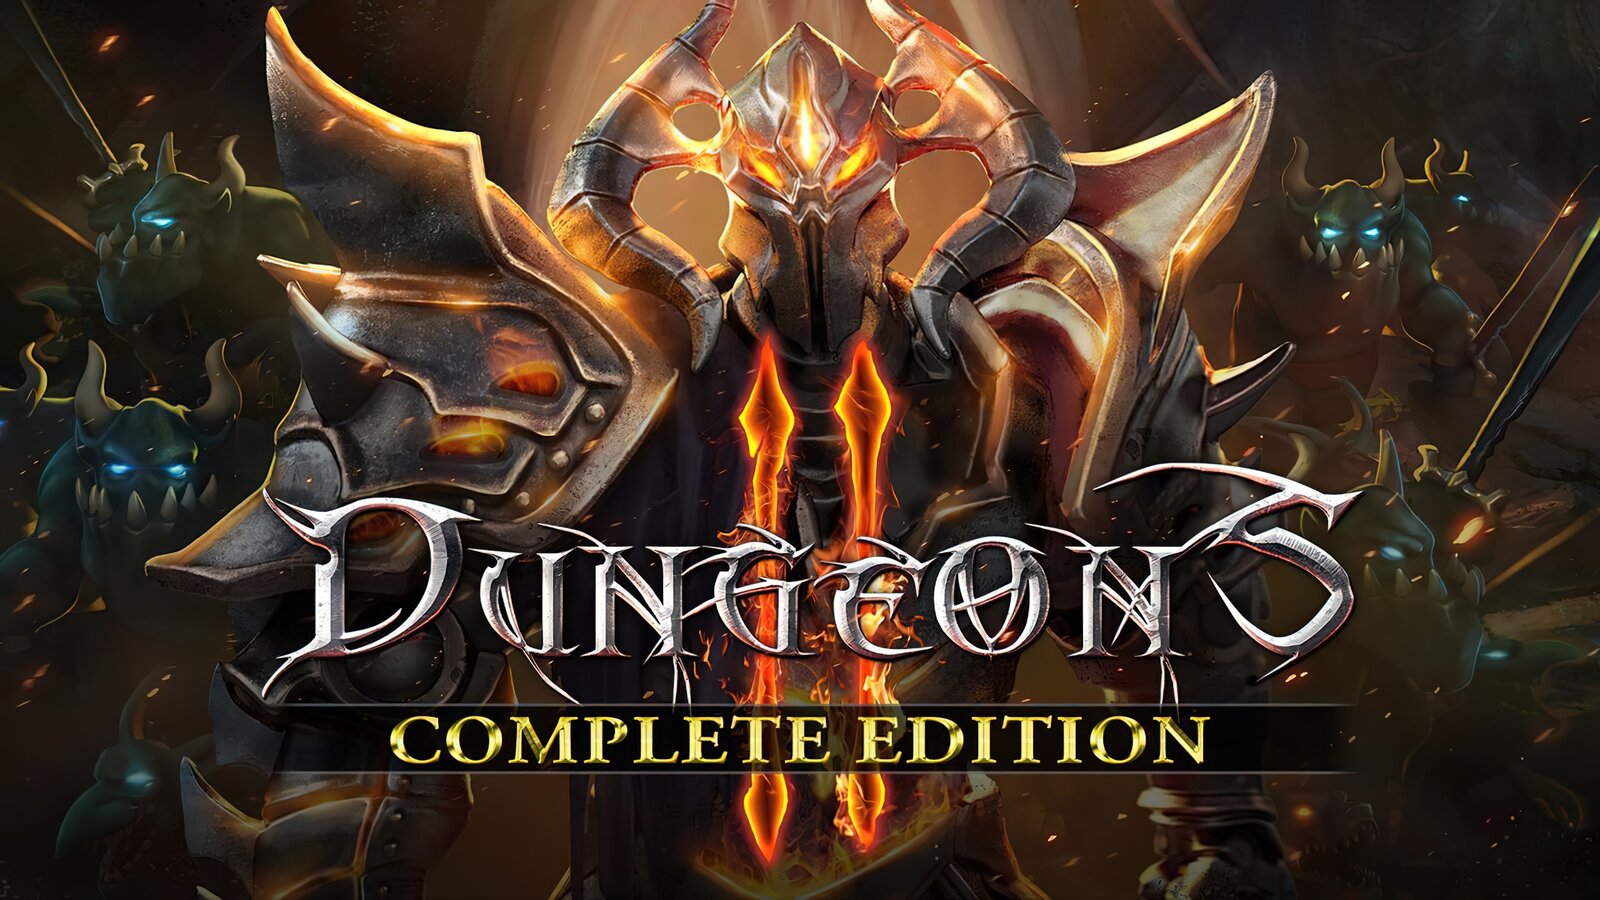 Dungeons II - Complete Edition